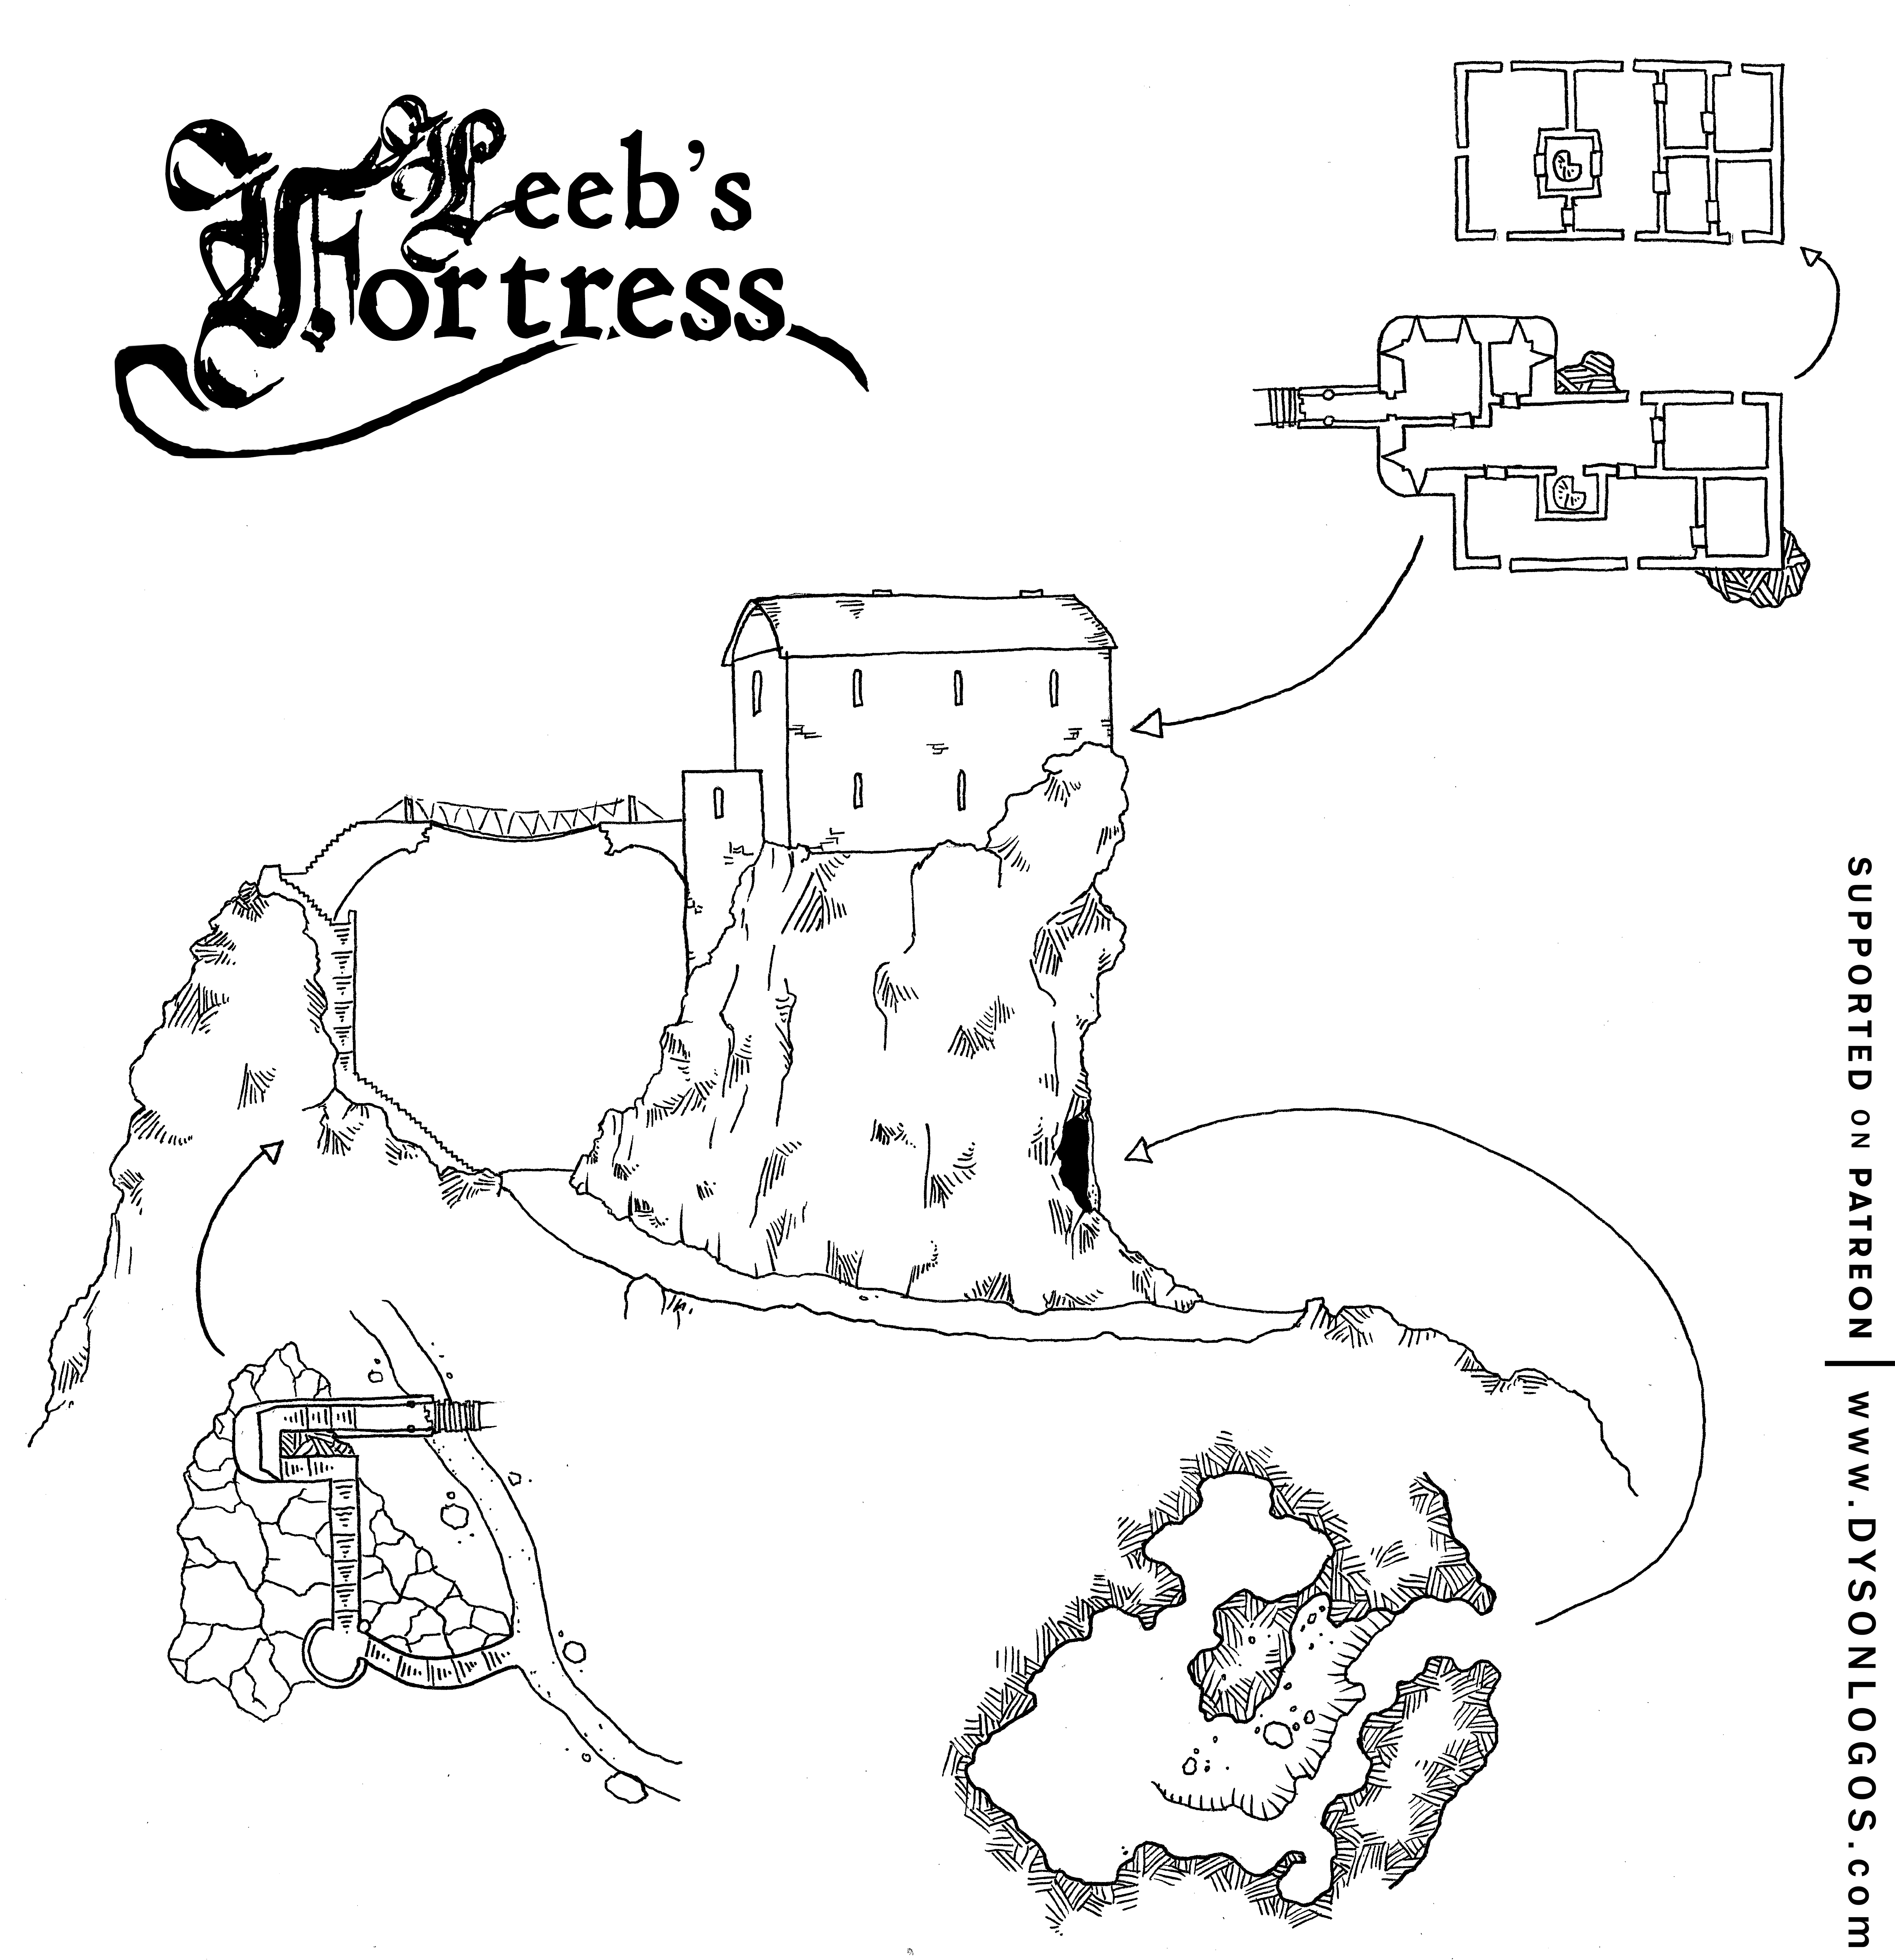 Leebs-Fortress-Patreon.png